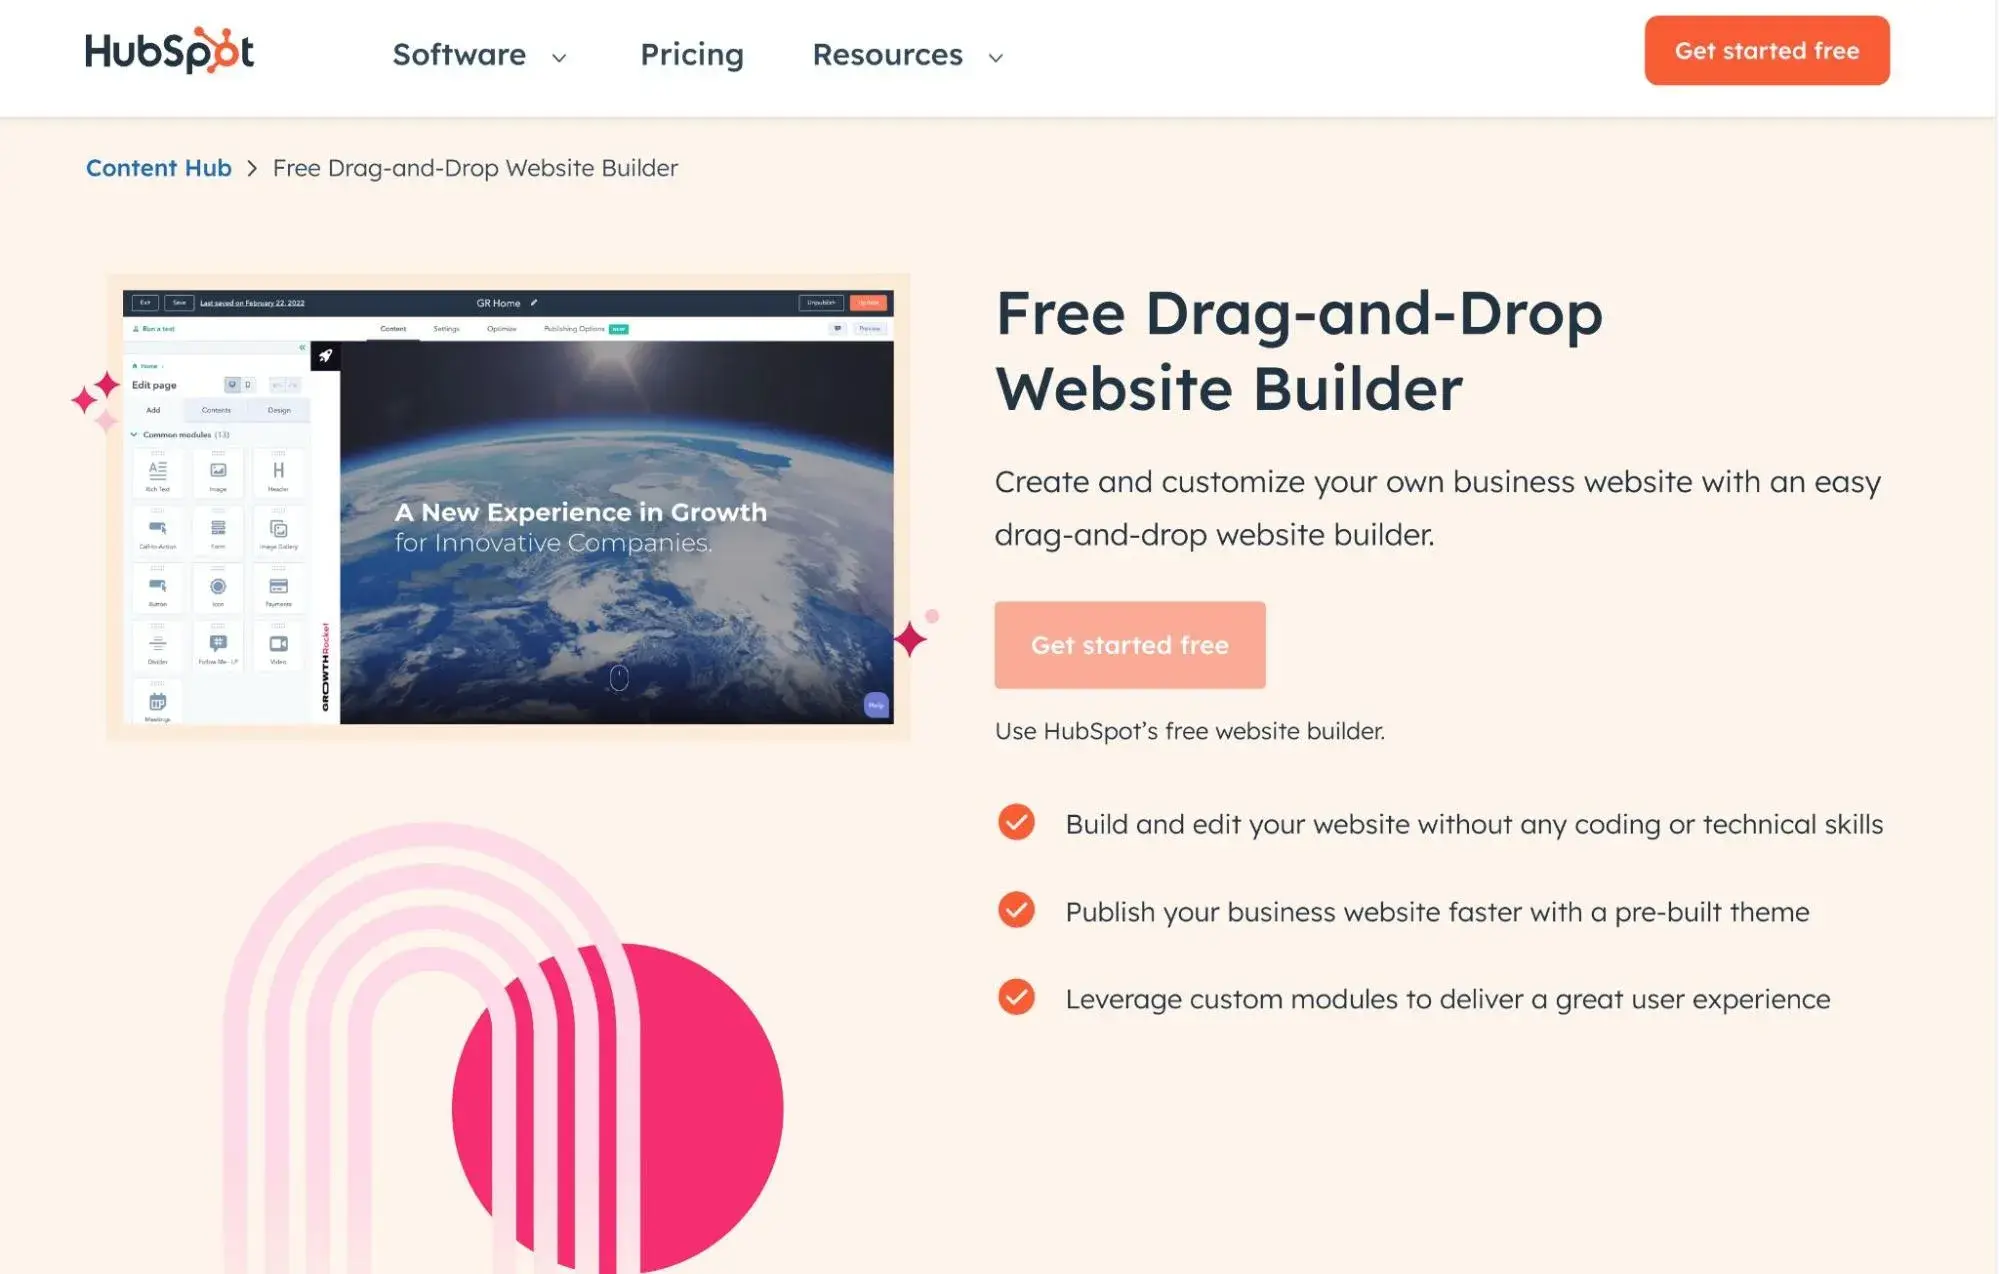 The HubSpot Content Hub homepage